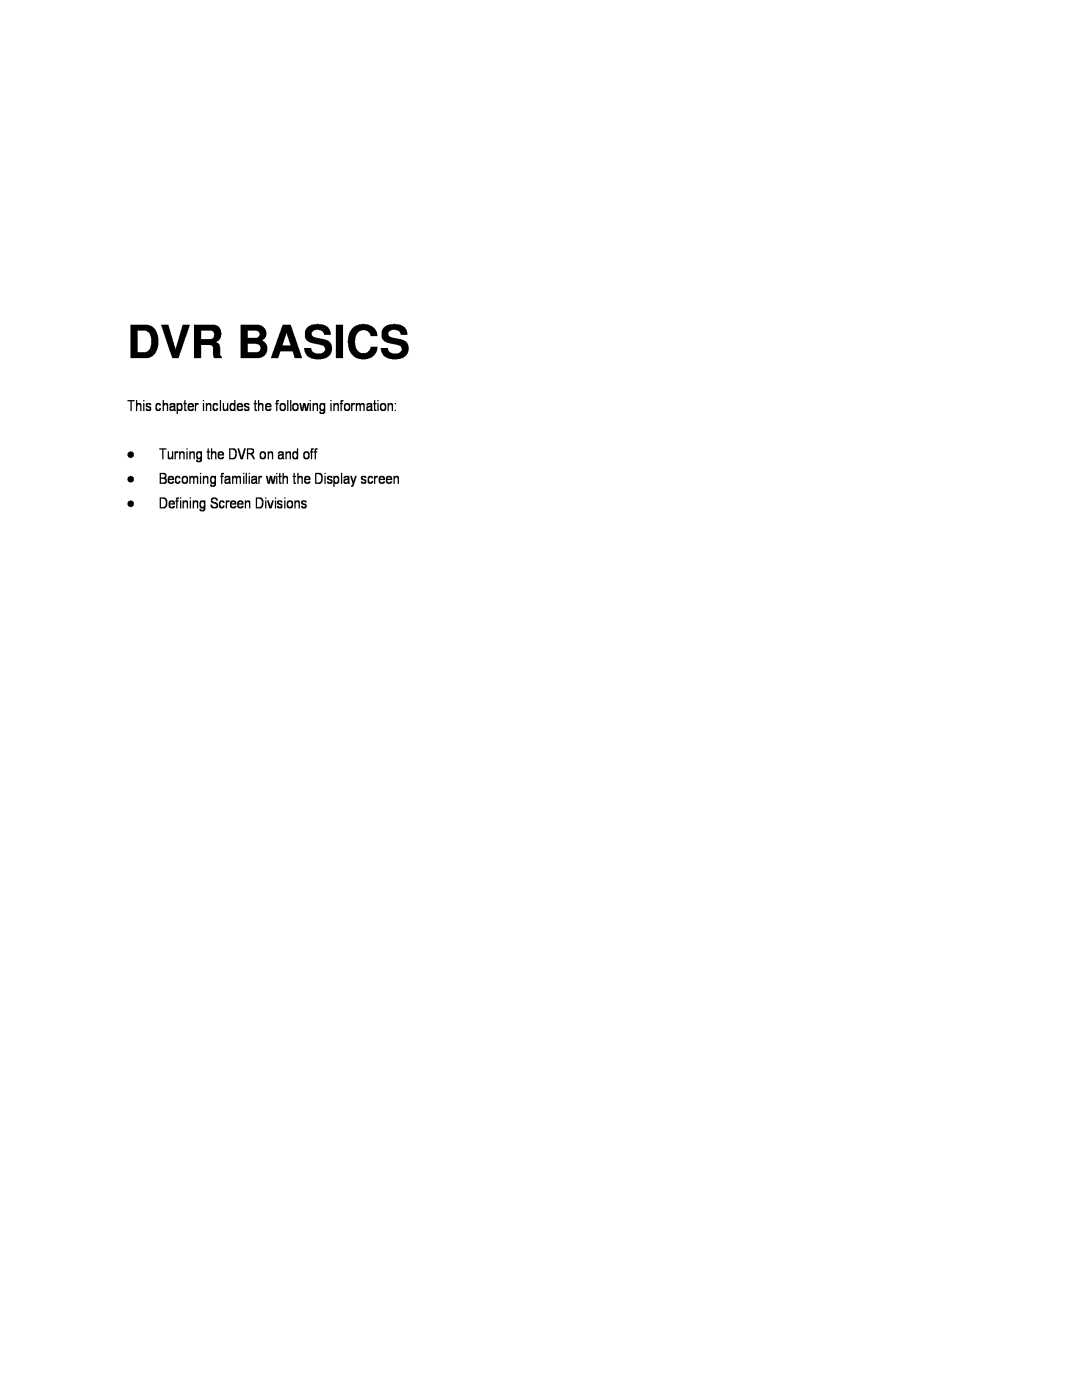 Toshiba EVR16-X, EVR8-X, EVR32-X Dvr Basics, This chapter includes the following information, Defining Screen Divisions 